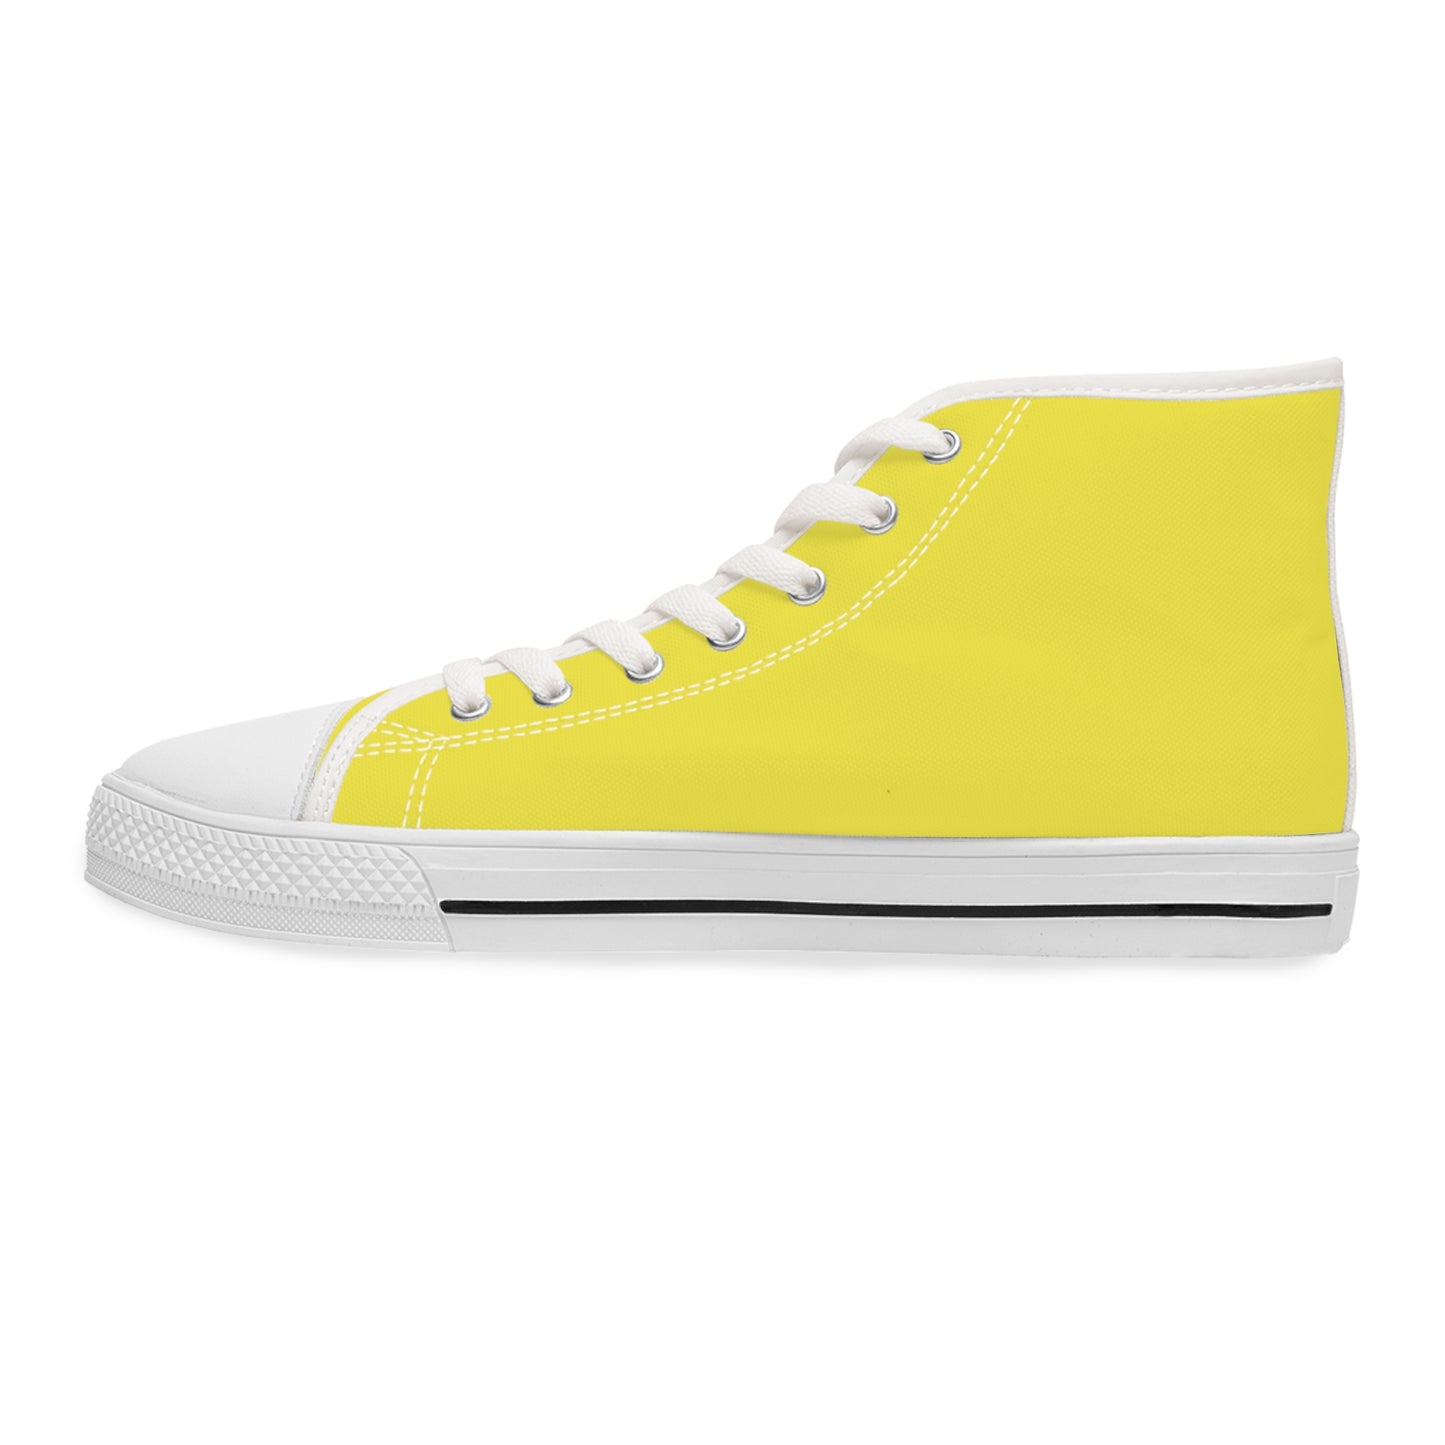 Women's High Top Sneakers - Yellow US 12 White sole